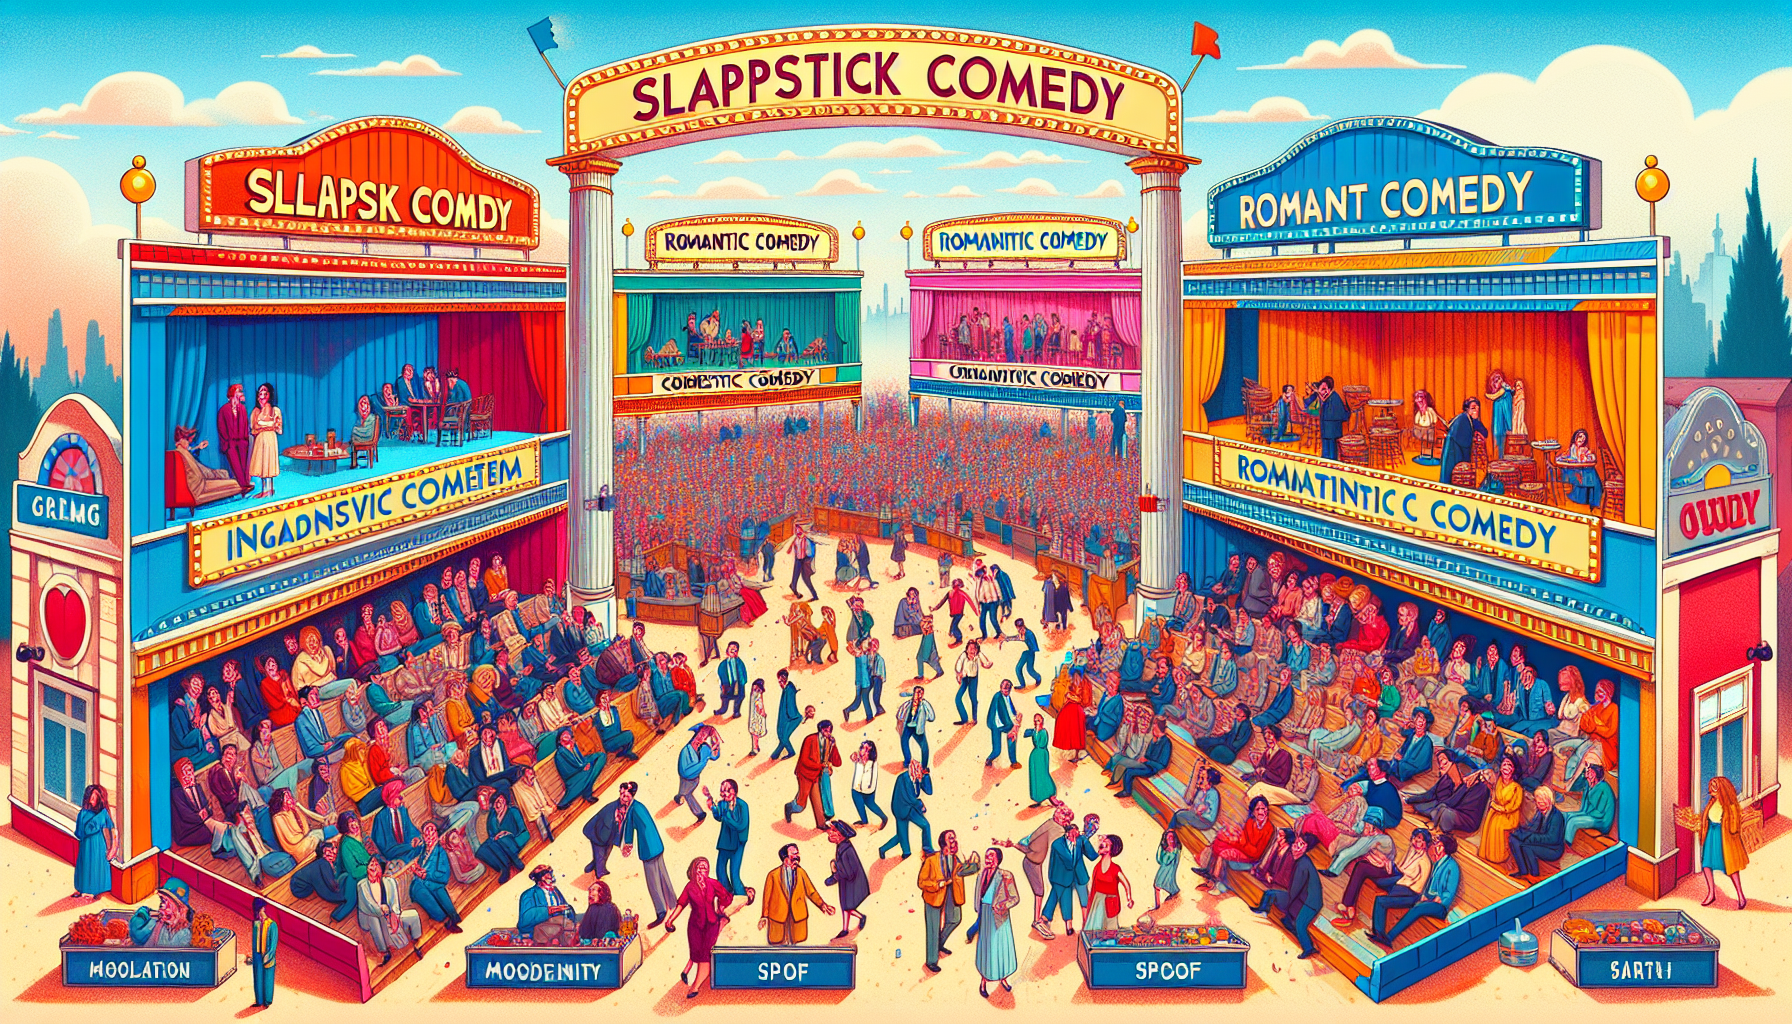 A whimsical, vibrant illustration of a bustling outdoor cinema with distinct areas themed around different comedy subgenres: a slapstick section with oversized props, a romantic comedy area with a coz